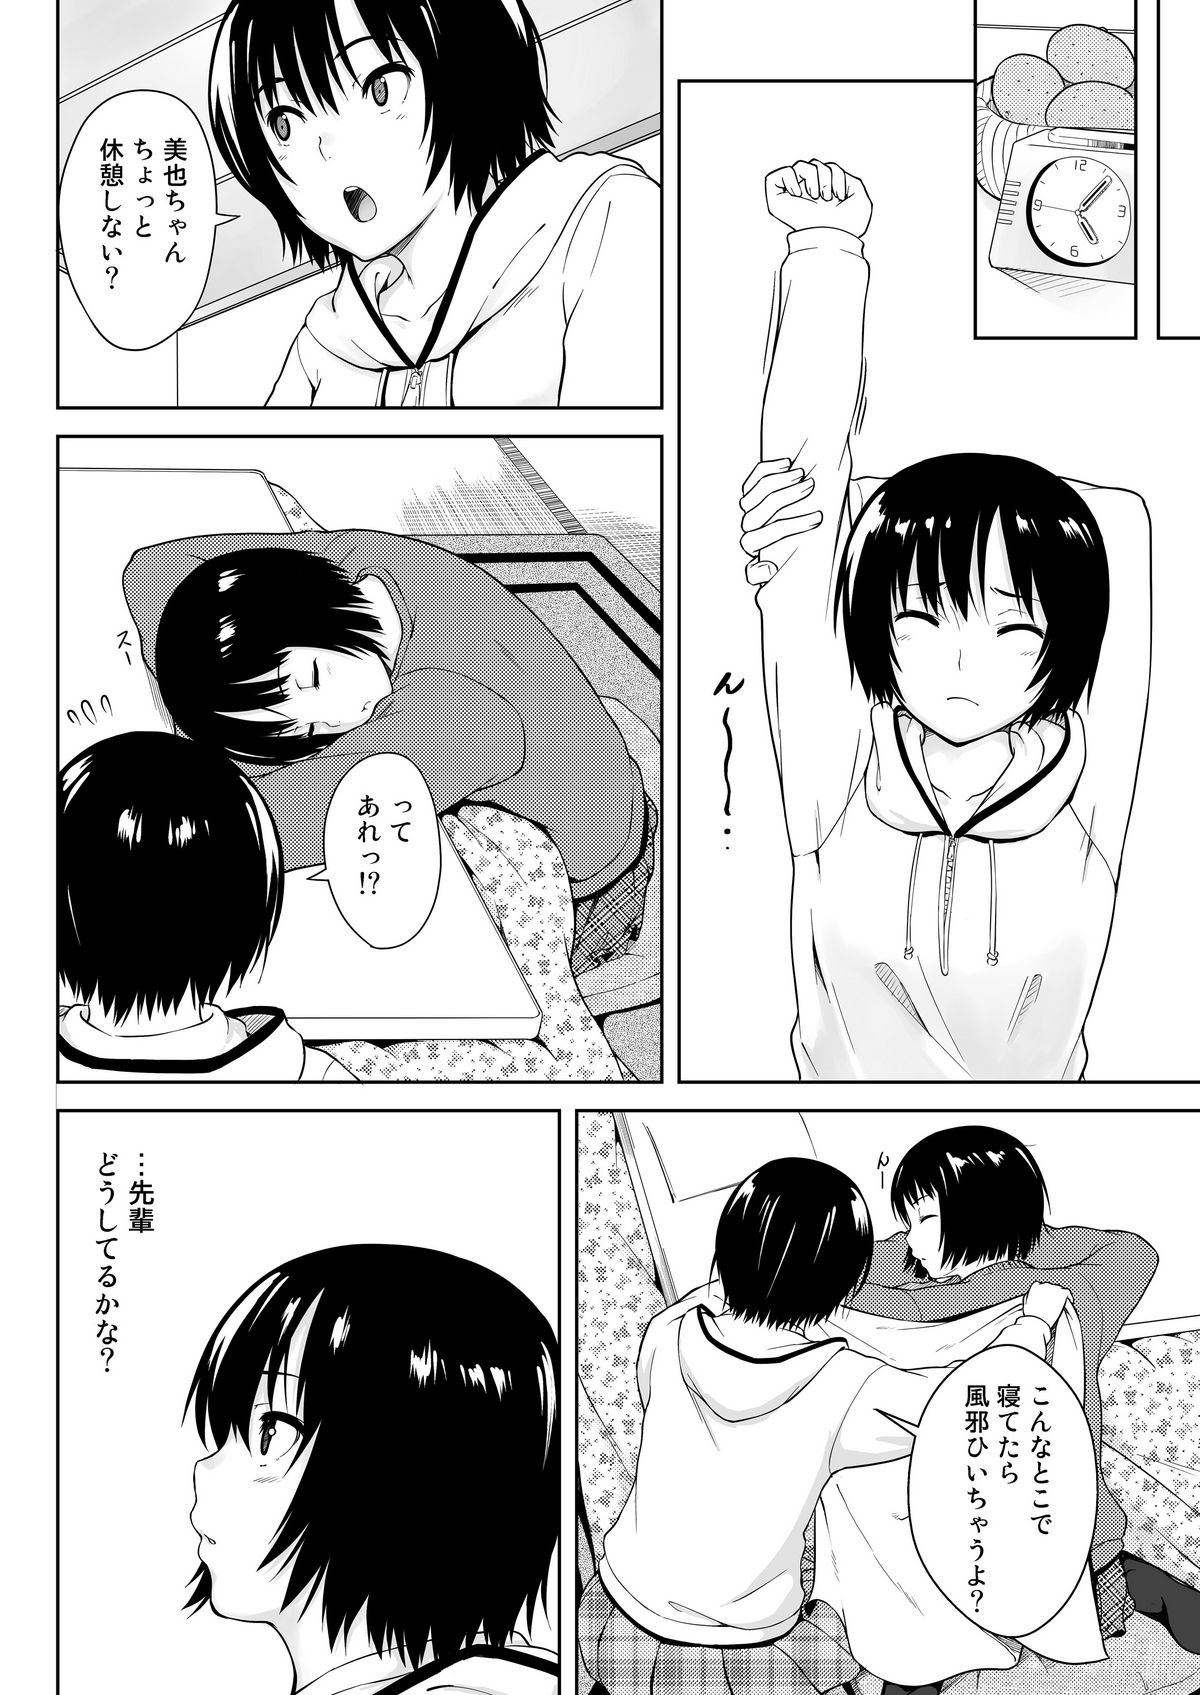 [Pillow Works (Oboro)] Ai Want Kiss (Amagami) [Digital] page 10 full